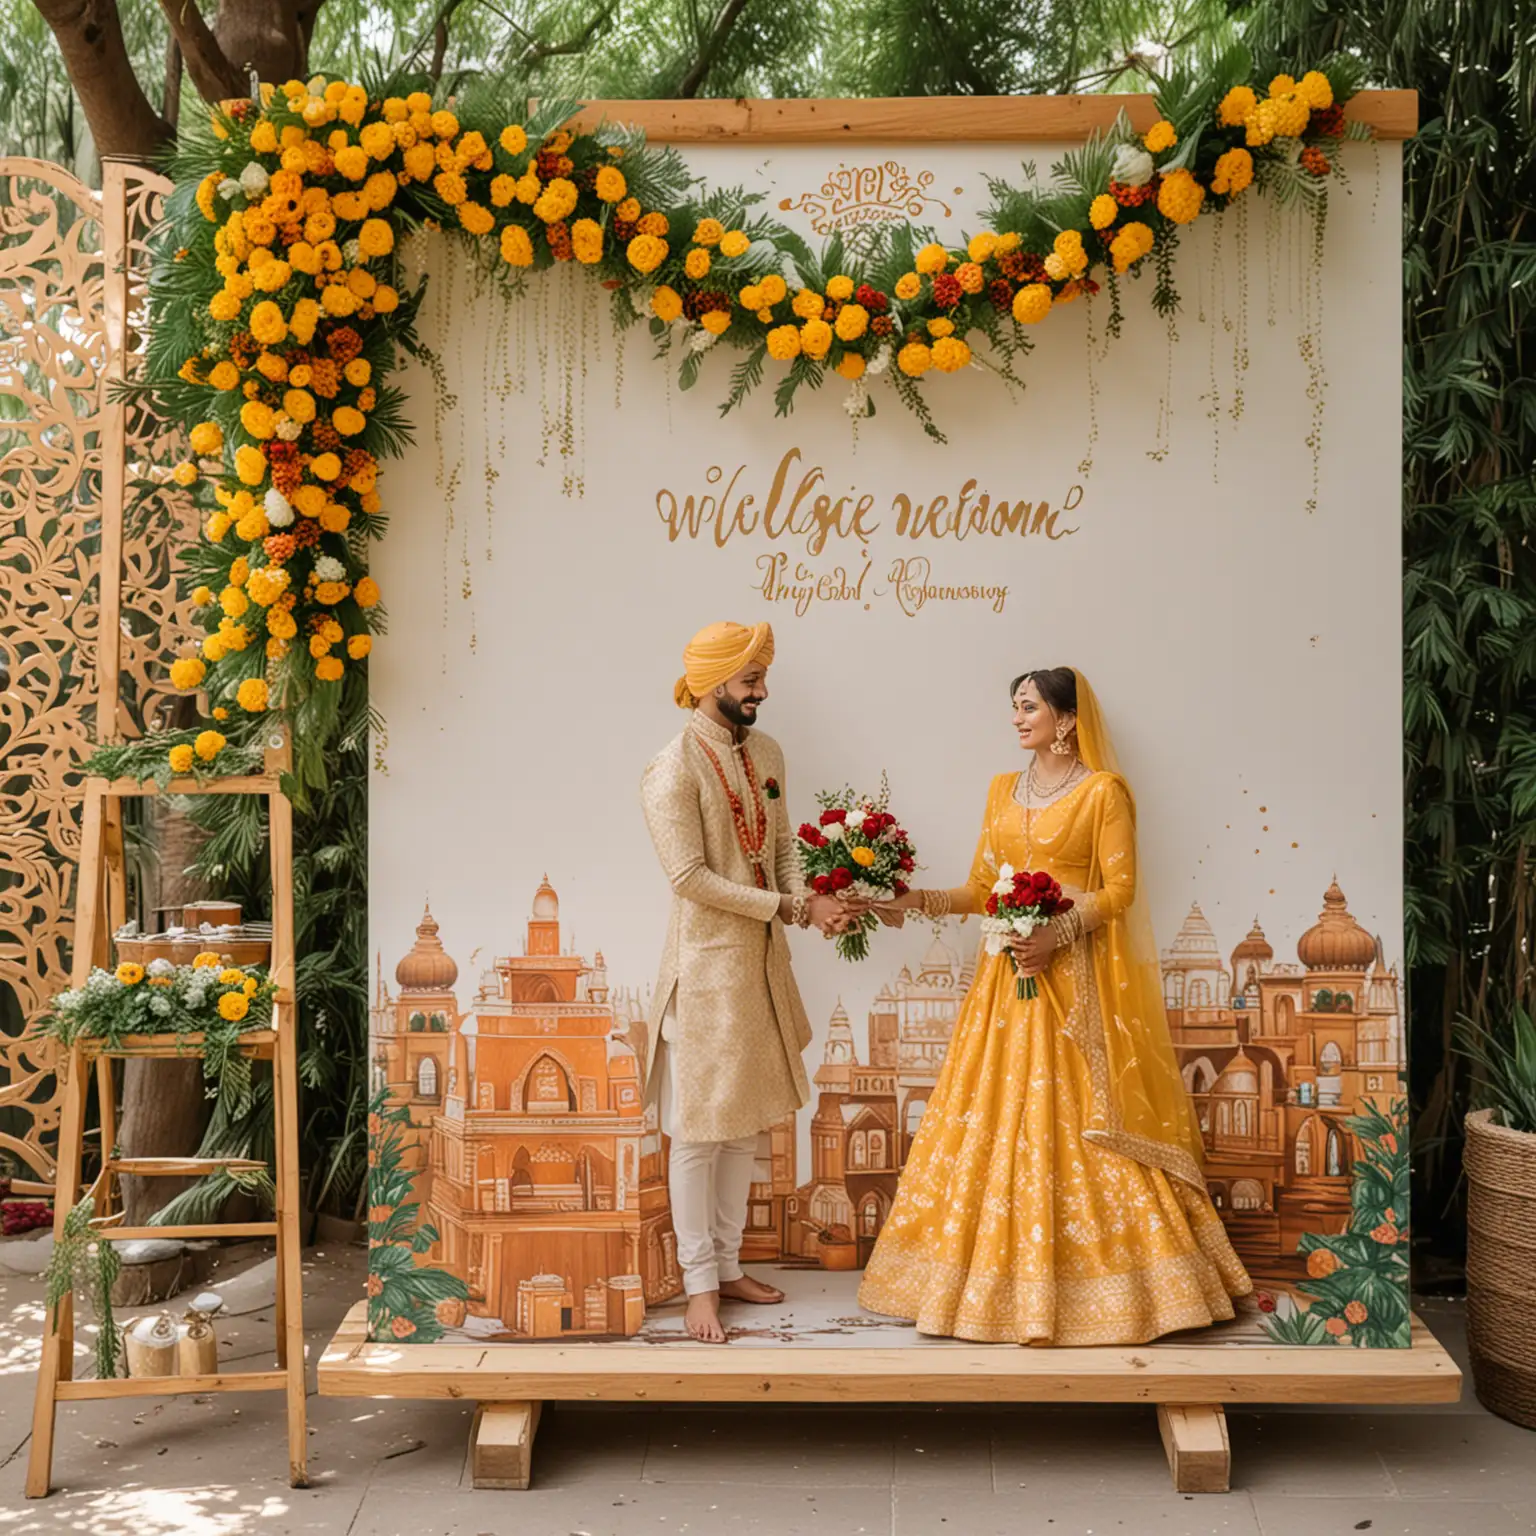 Wedding Welcom foam board printed on vinyl eco solvent with a wooden stand and Haldi decor in the background